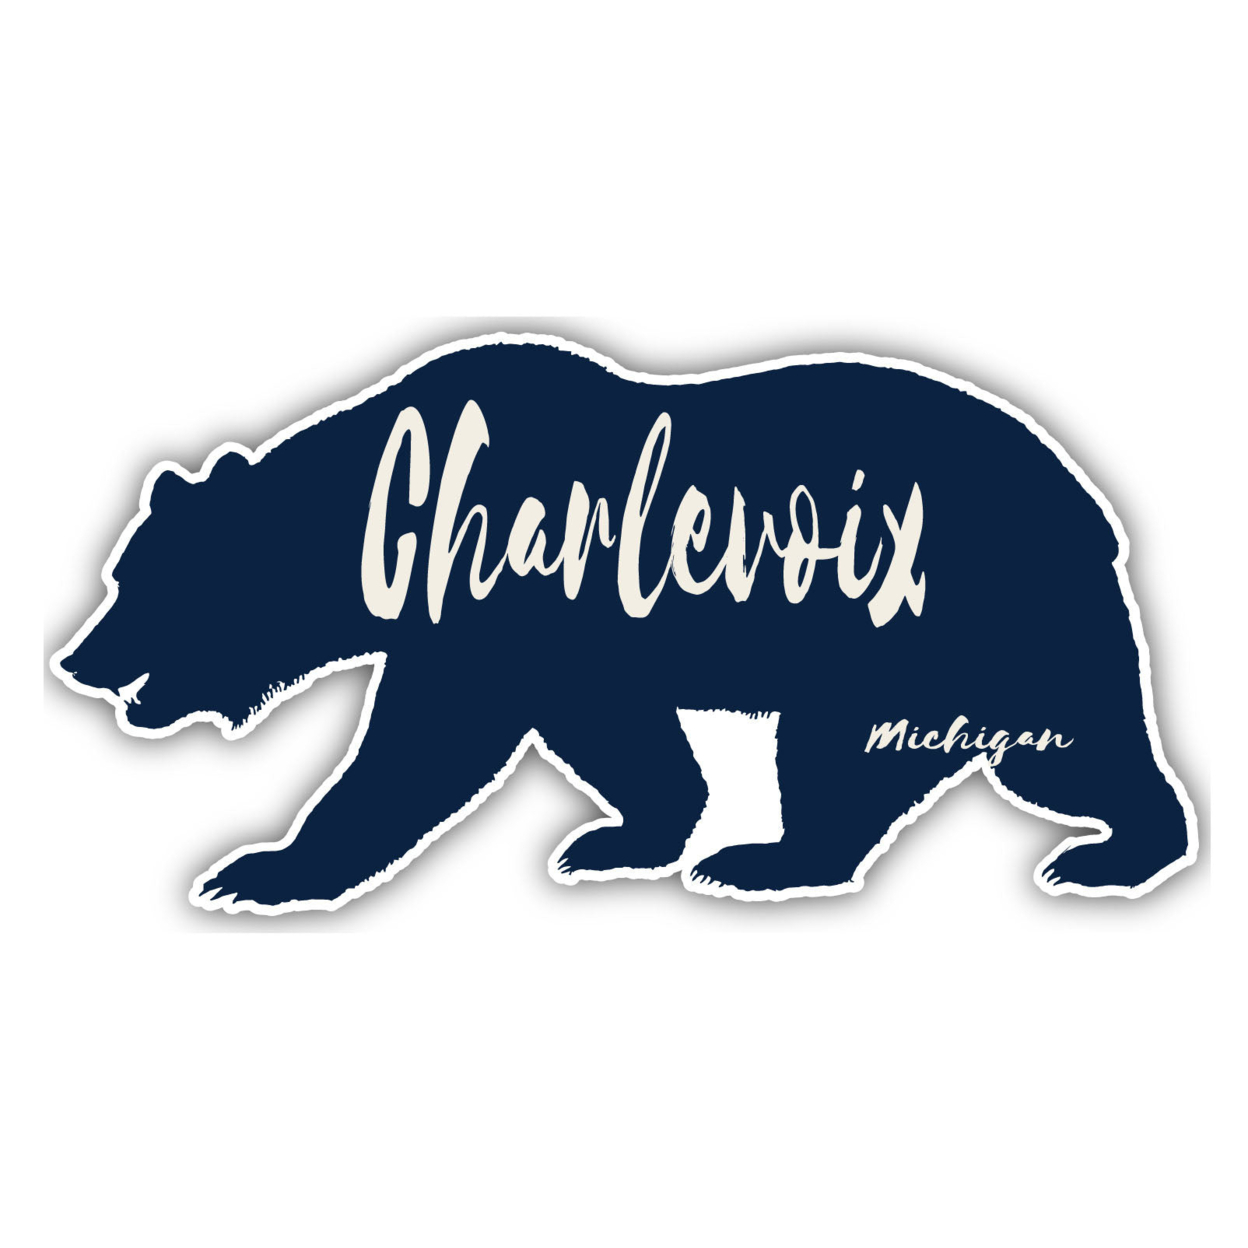 Charlevoix Michigan Souvenir Decorative Stickers (Choose Theme And Size) - 4-Pack, 6-Inch, Bear